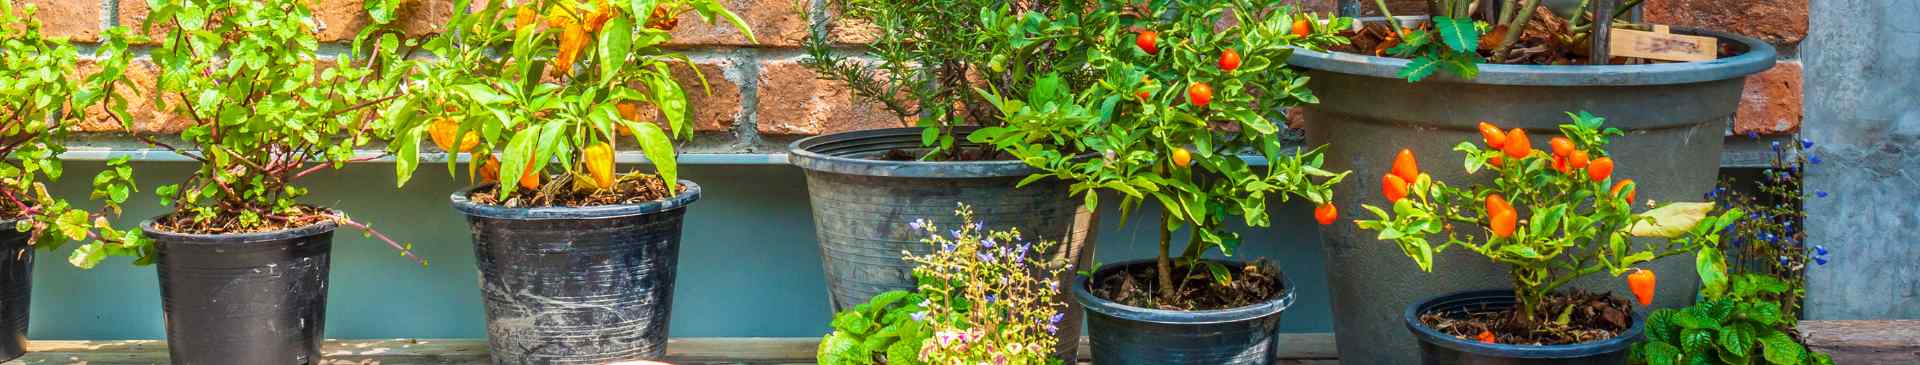 Growing Vegetables in Containers: 7 Tips to Get You Started